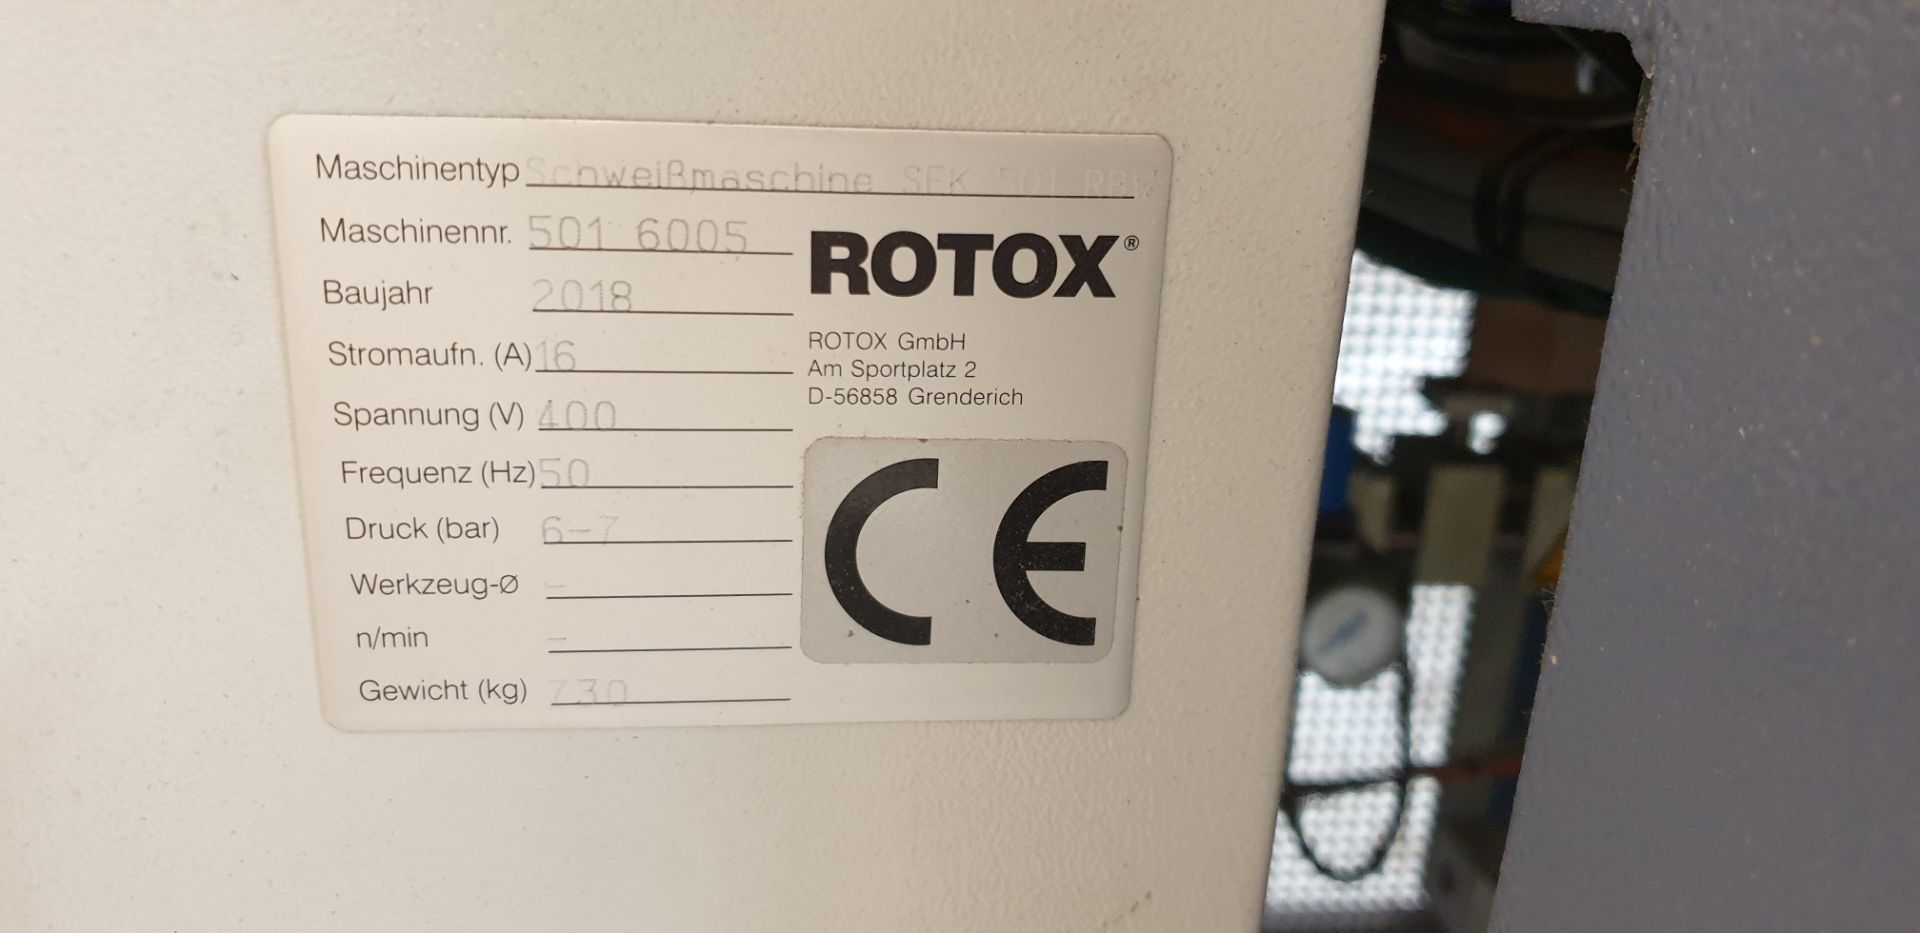 1: Rotox, SFK 501 RBW Double Welder, Serial Number: 501 6005, Year of Manufacture: 2018 - Image 3 of 5